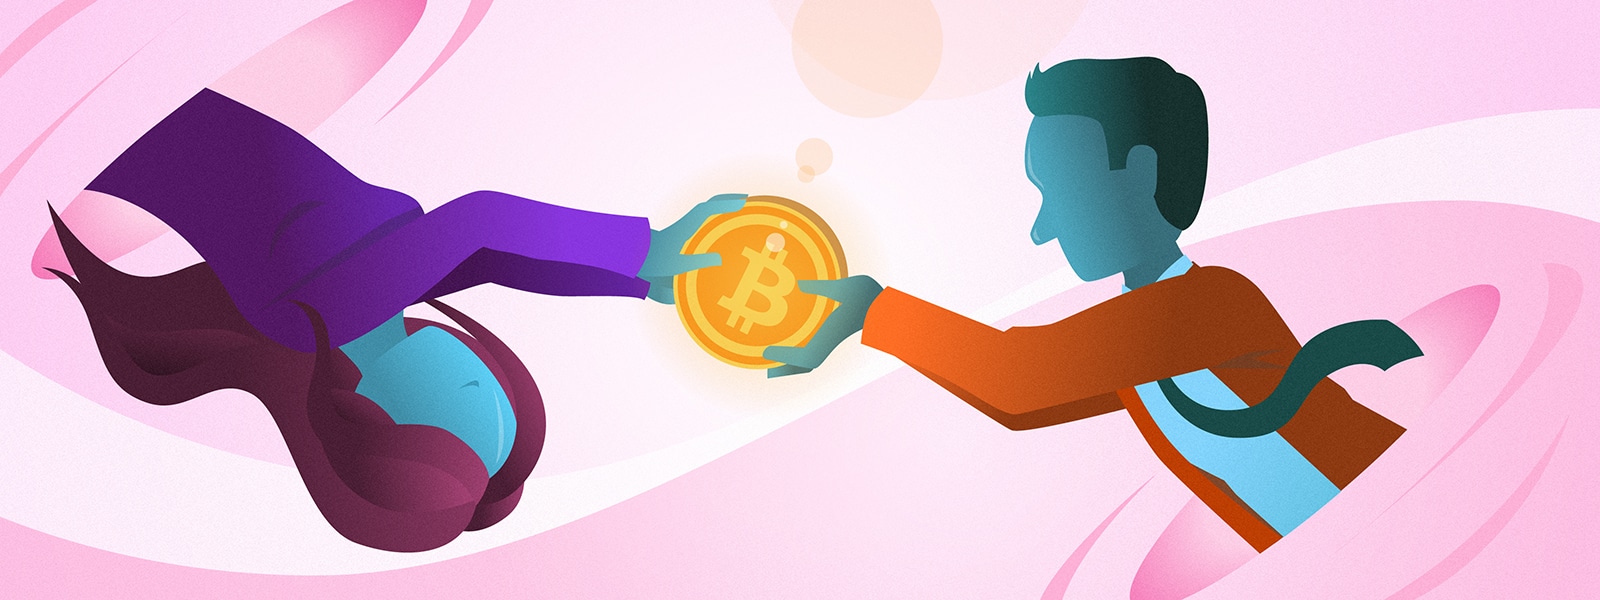 Illustration of a man and woman exchanging a bitcoin